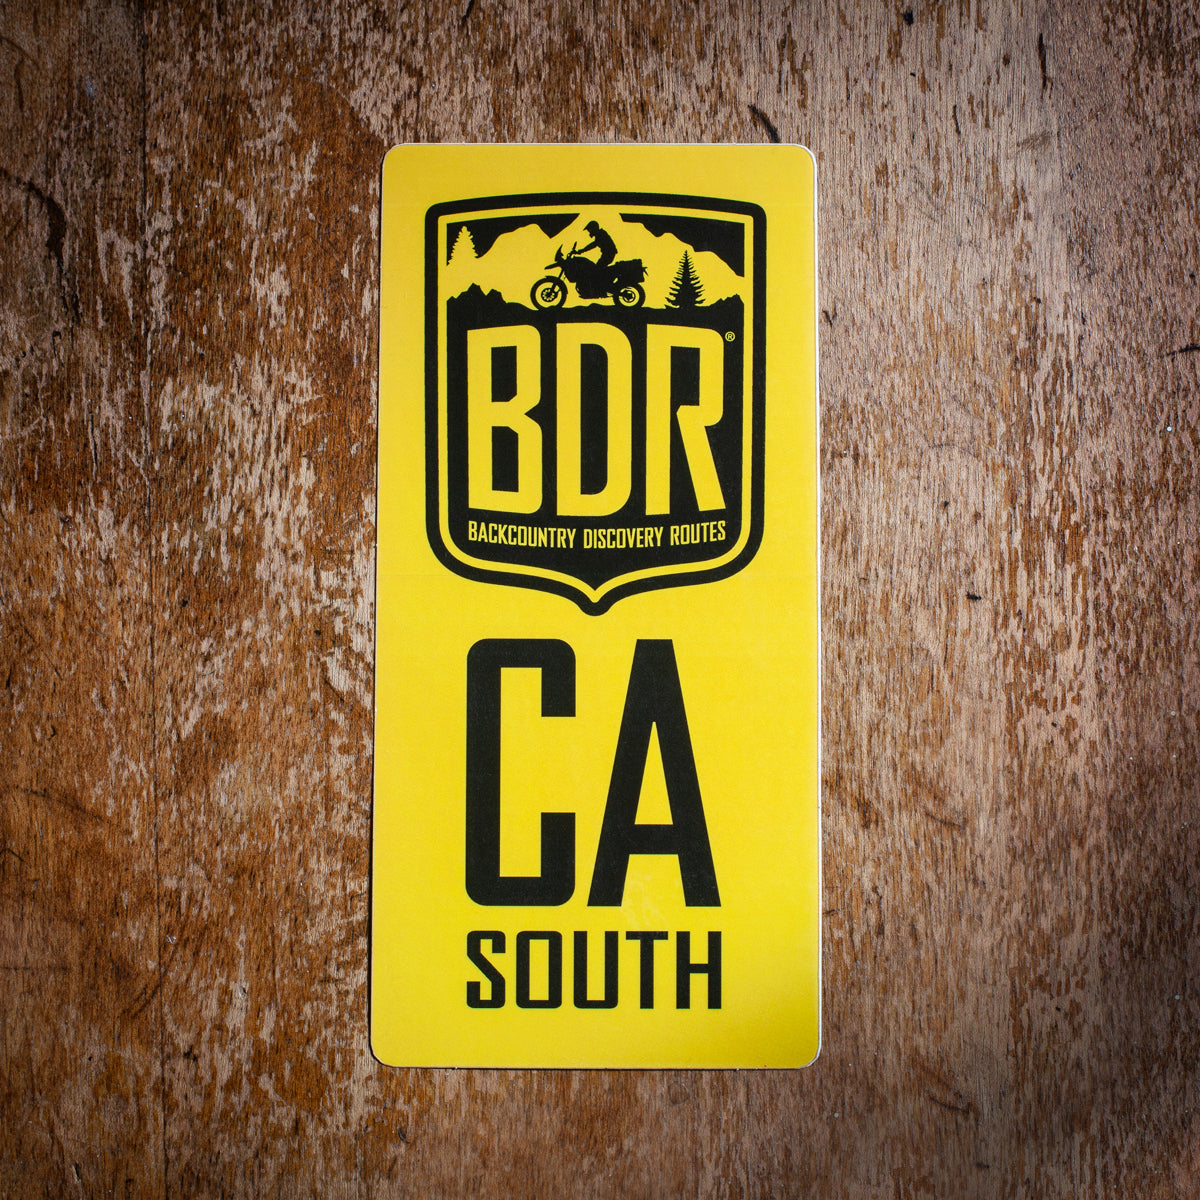 CABDR-South Route Decal